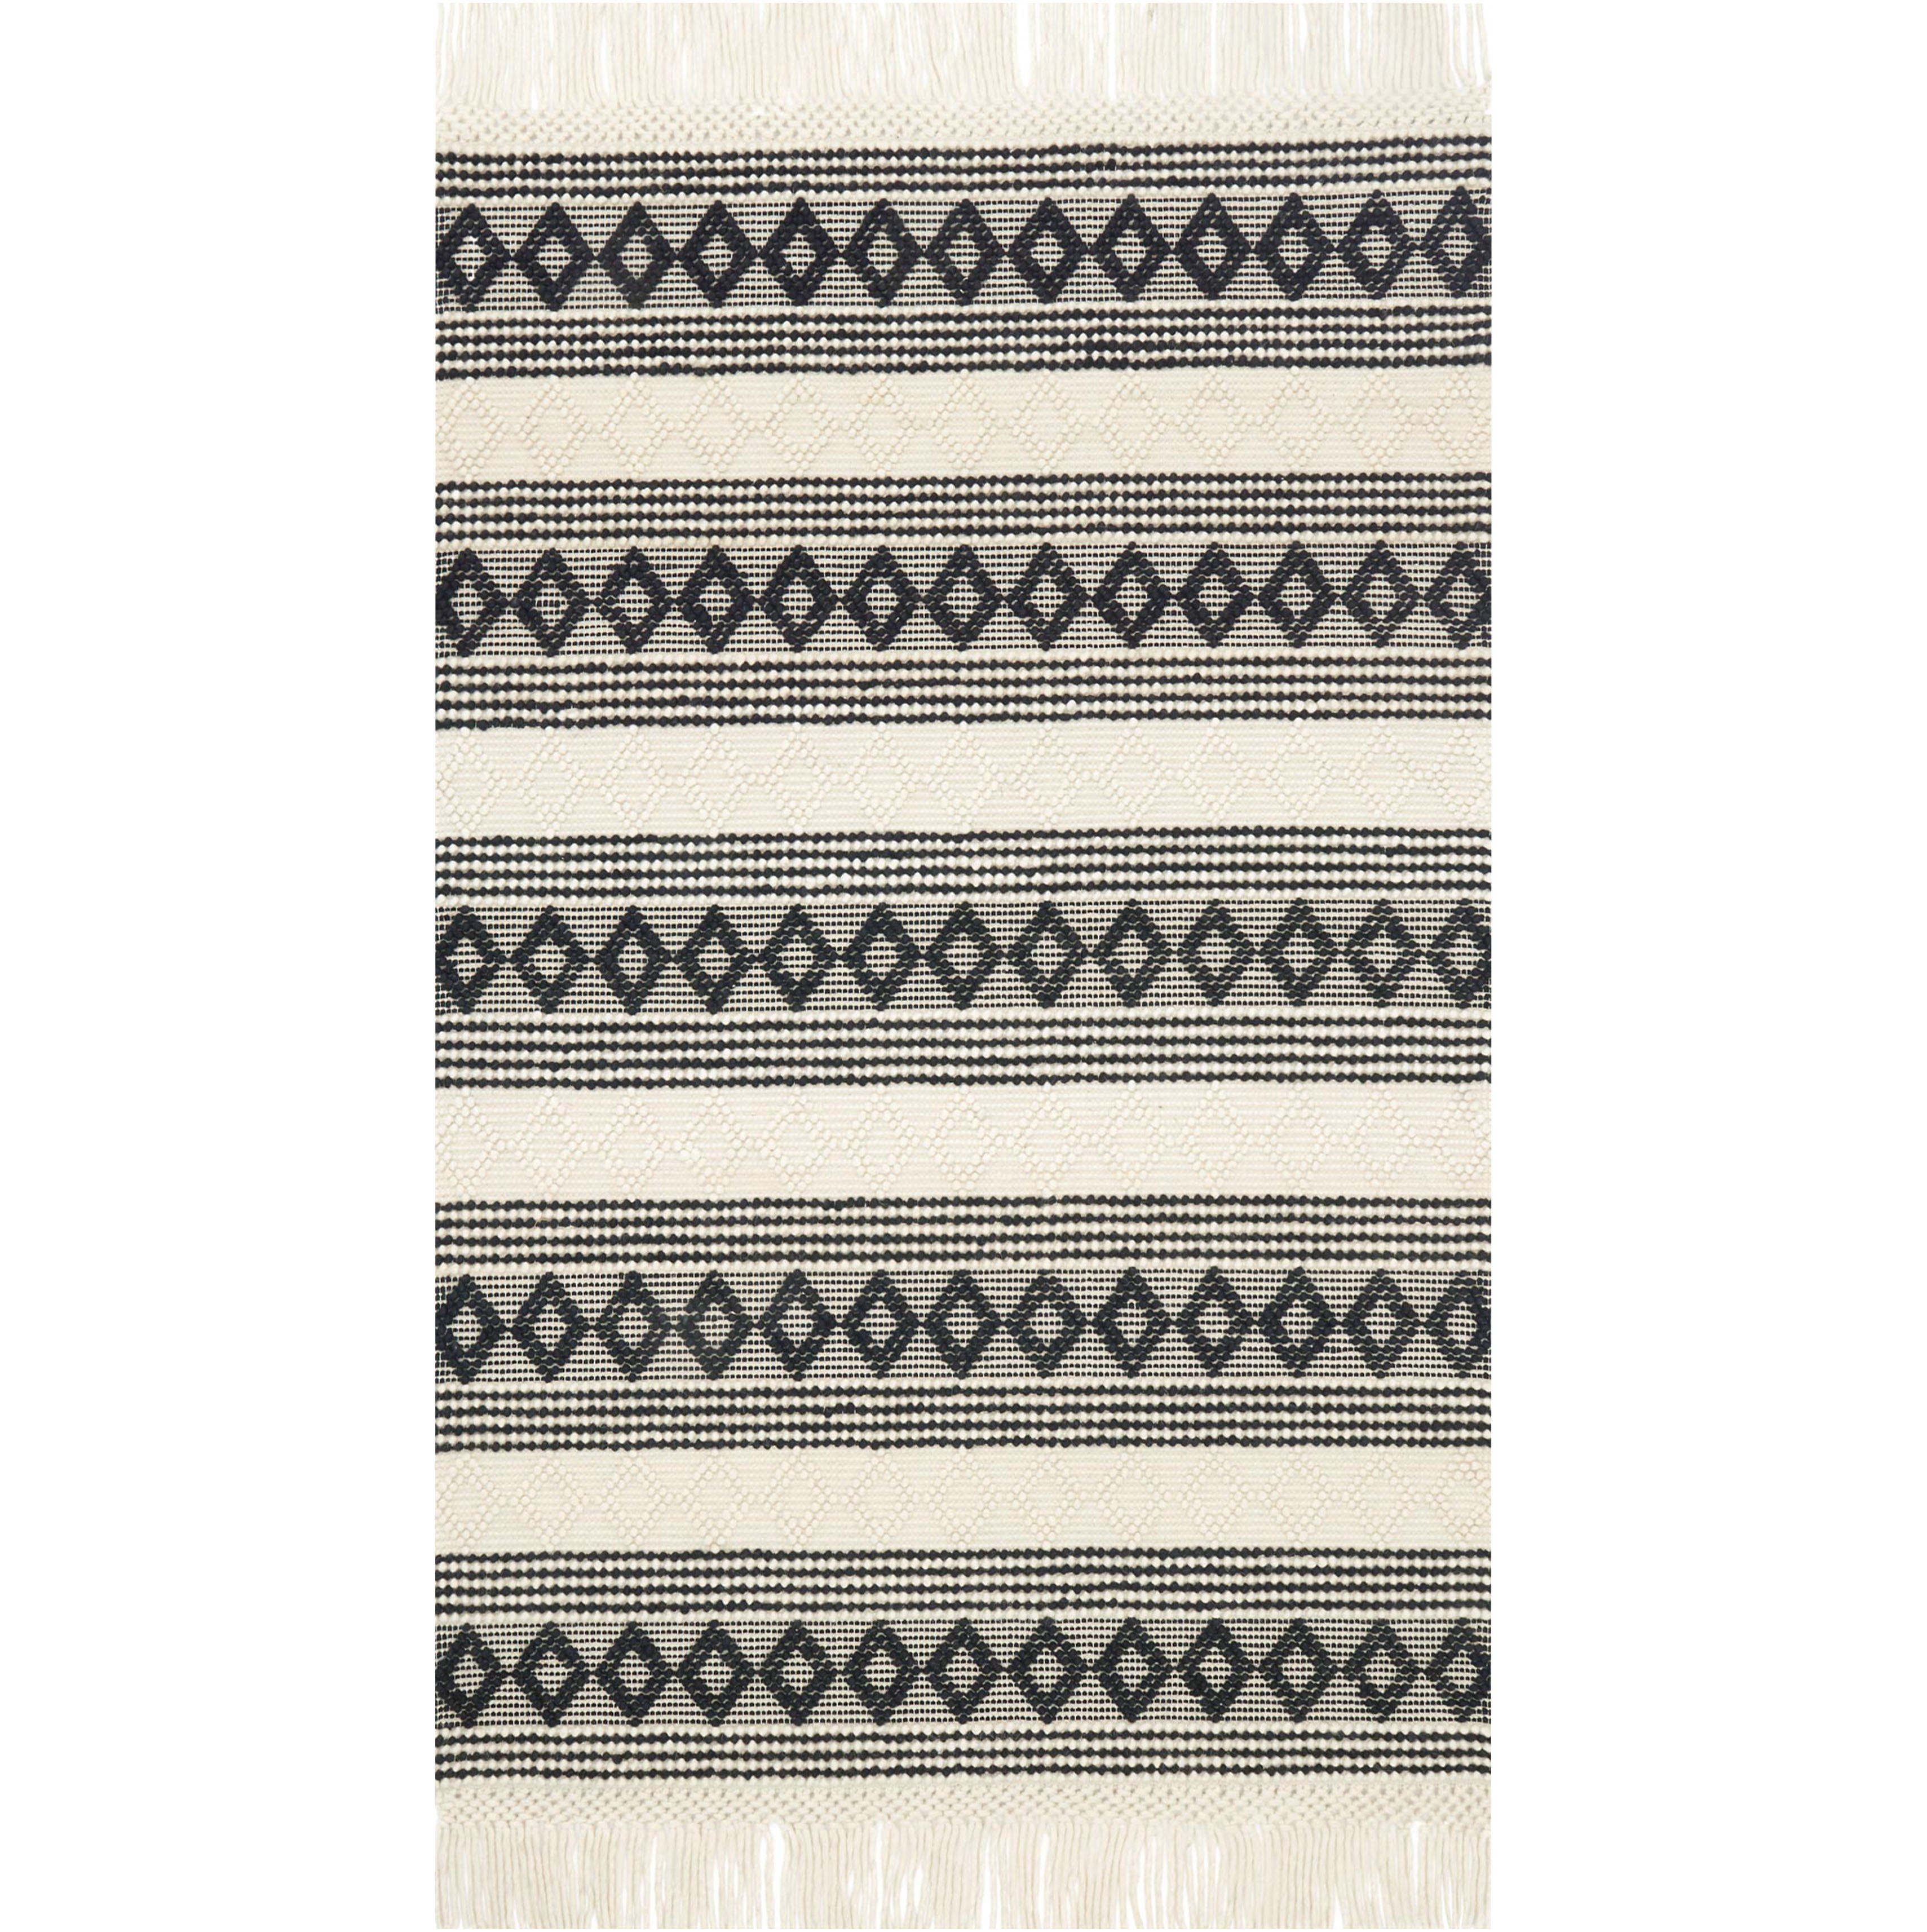 modern black and white diamond pattern rug with white tasselsItems range from $159.00 to $1239.00